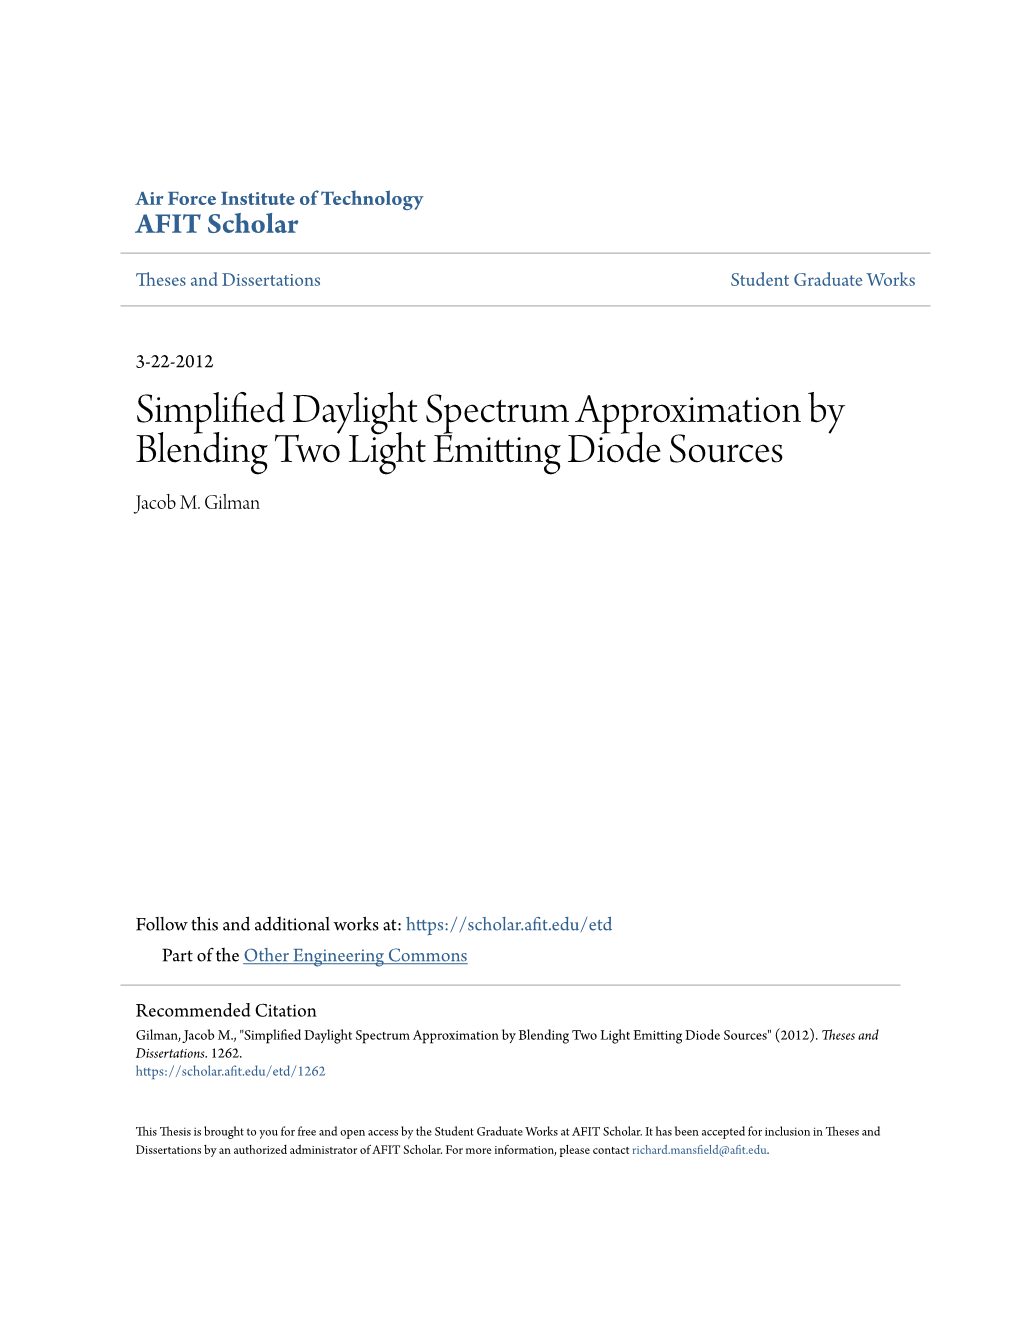 Simplified Daylight Spectrum Approximation by Blending Two Light Emitting Diode Sources" (2012)